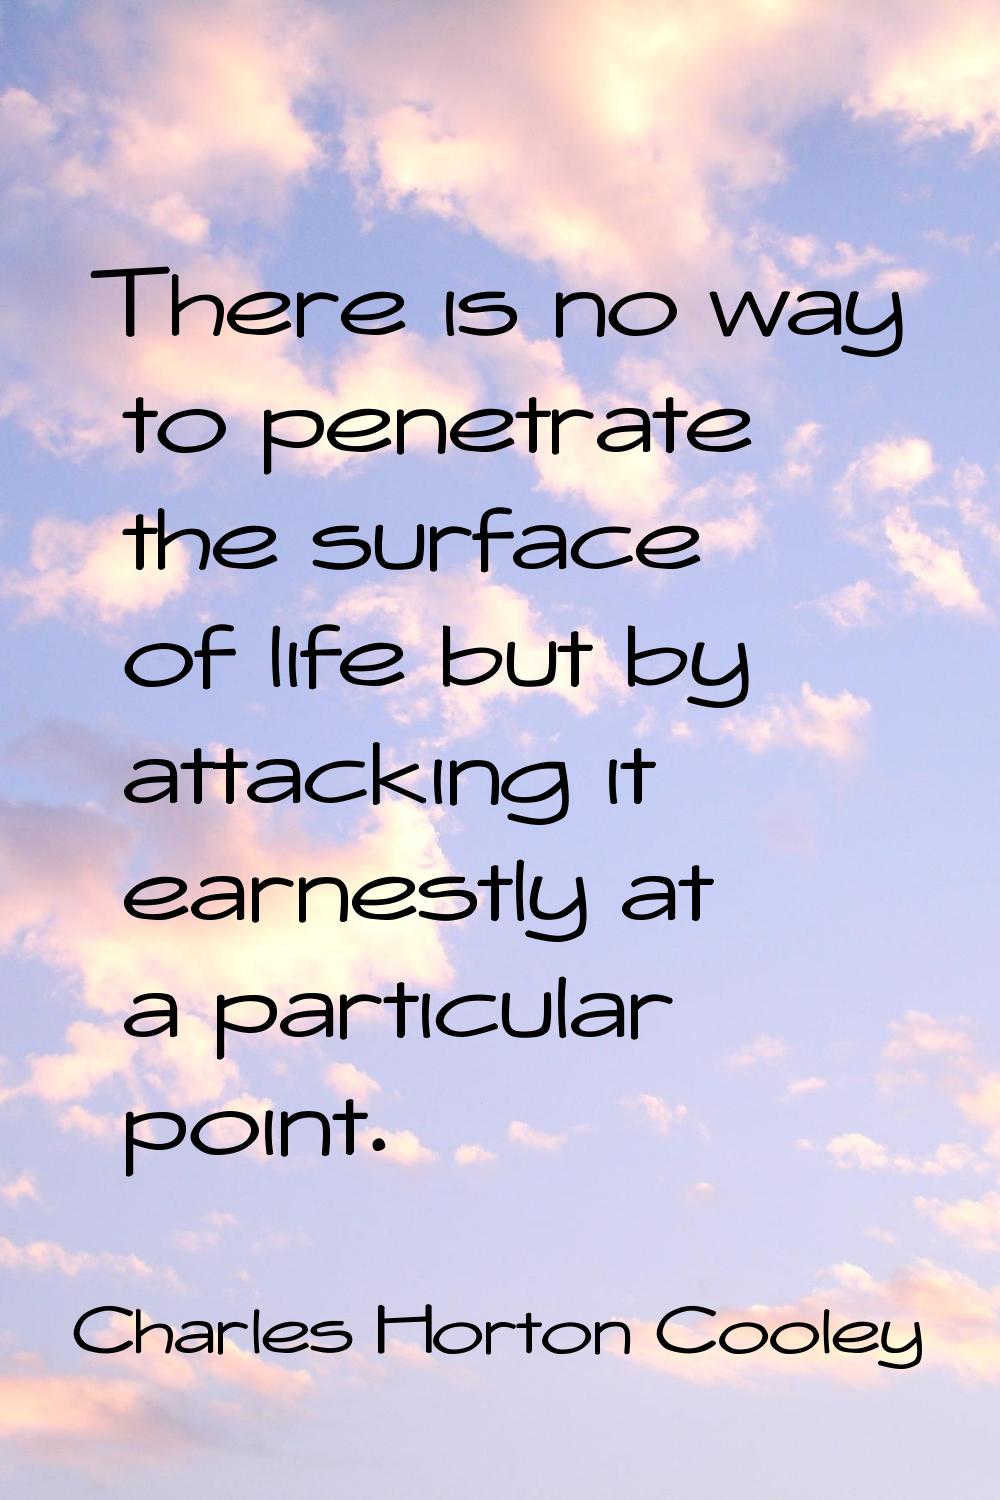 There is no way to penetrate the surface of life but by attacking it earnestly at a particular poin